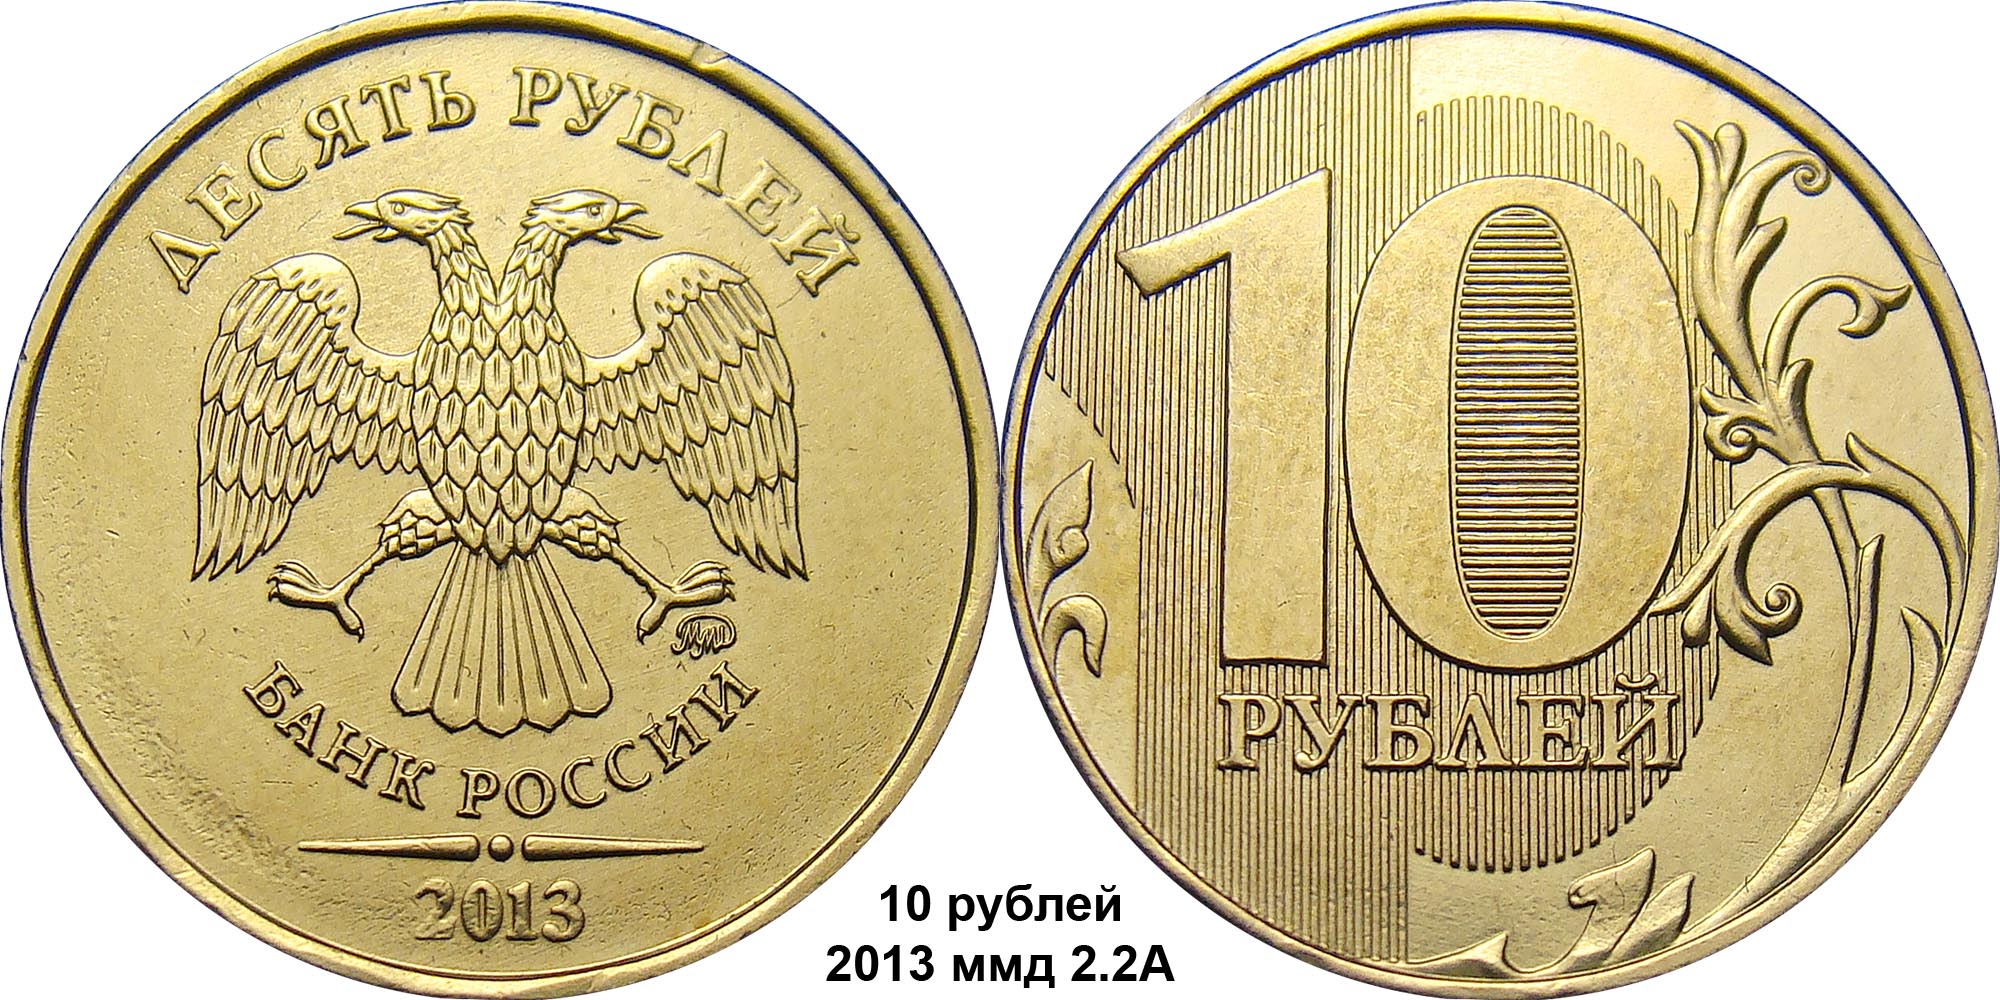 Russian 10 ruble coin -- 2013 issue